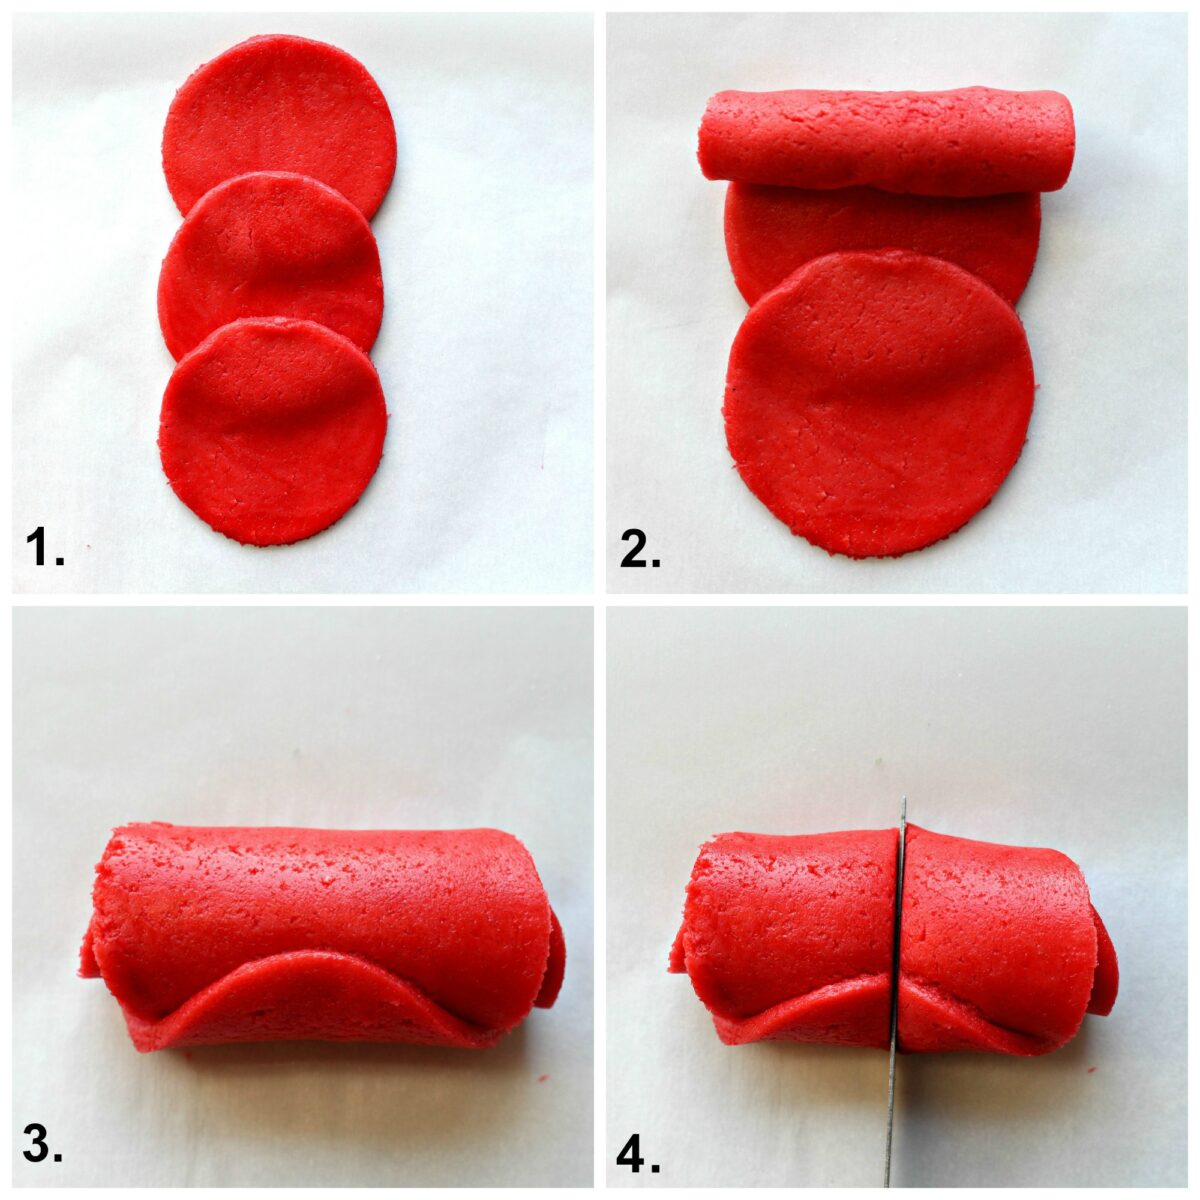 Instructions: overlap edges of cookie dough circles, roll up, cut in half forming two rose cookies.